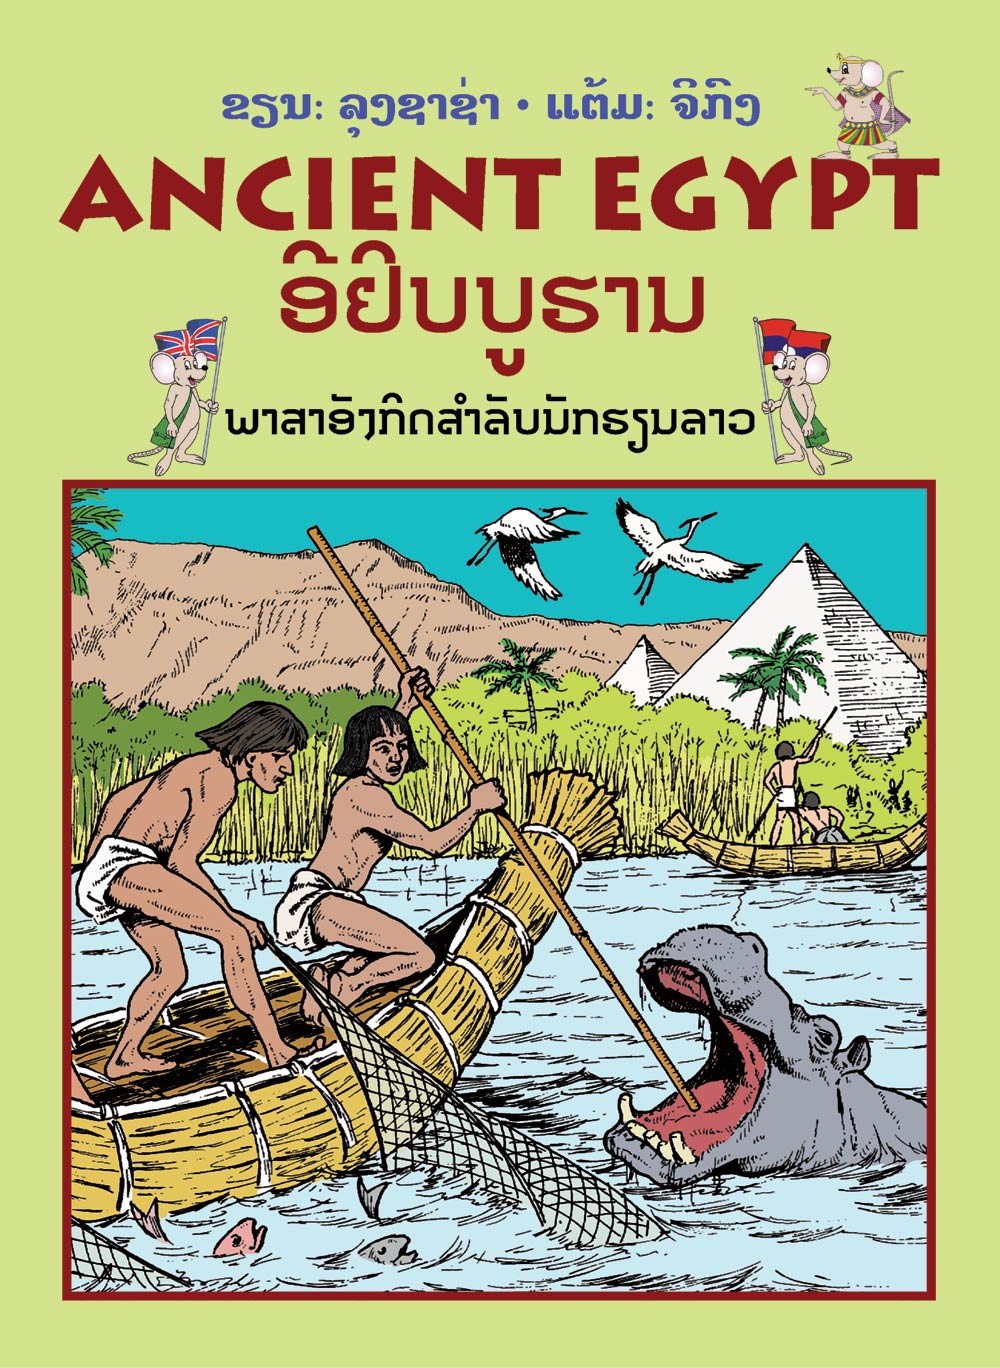 Ancient Egypt large book cover, published in English for Lao students